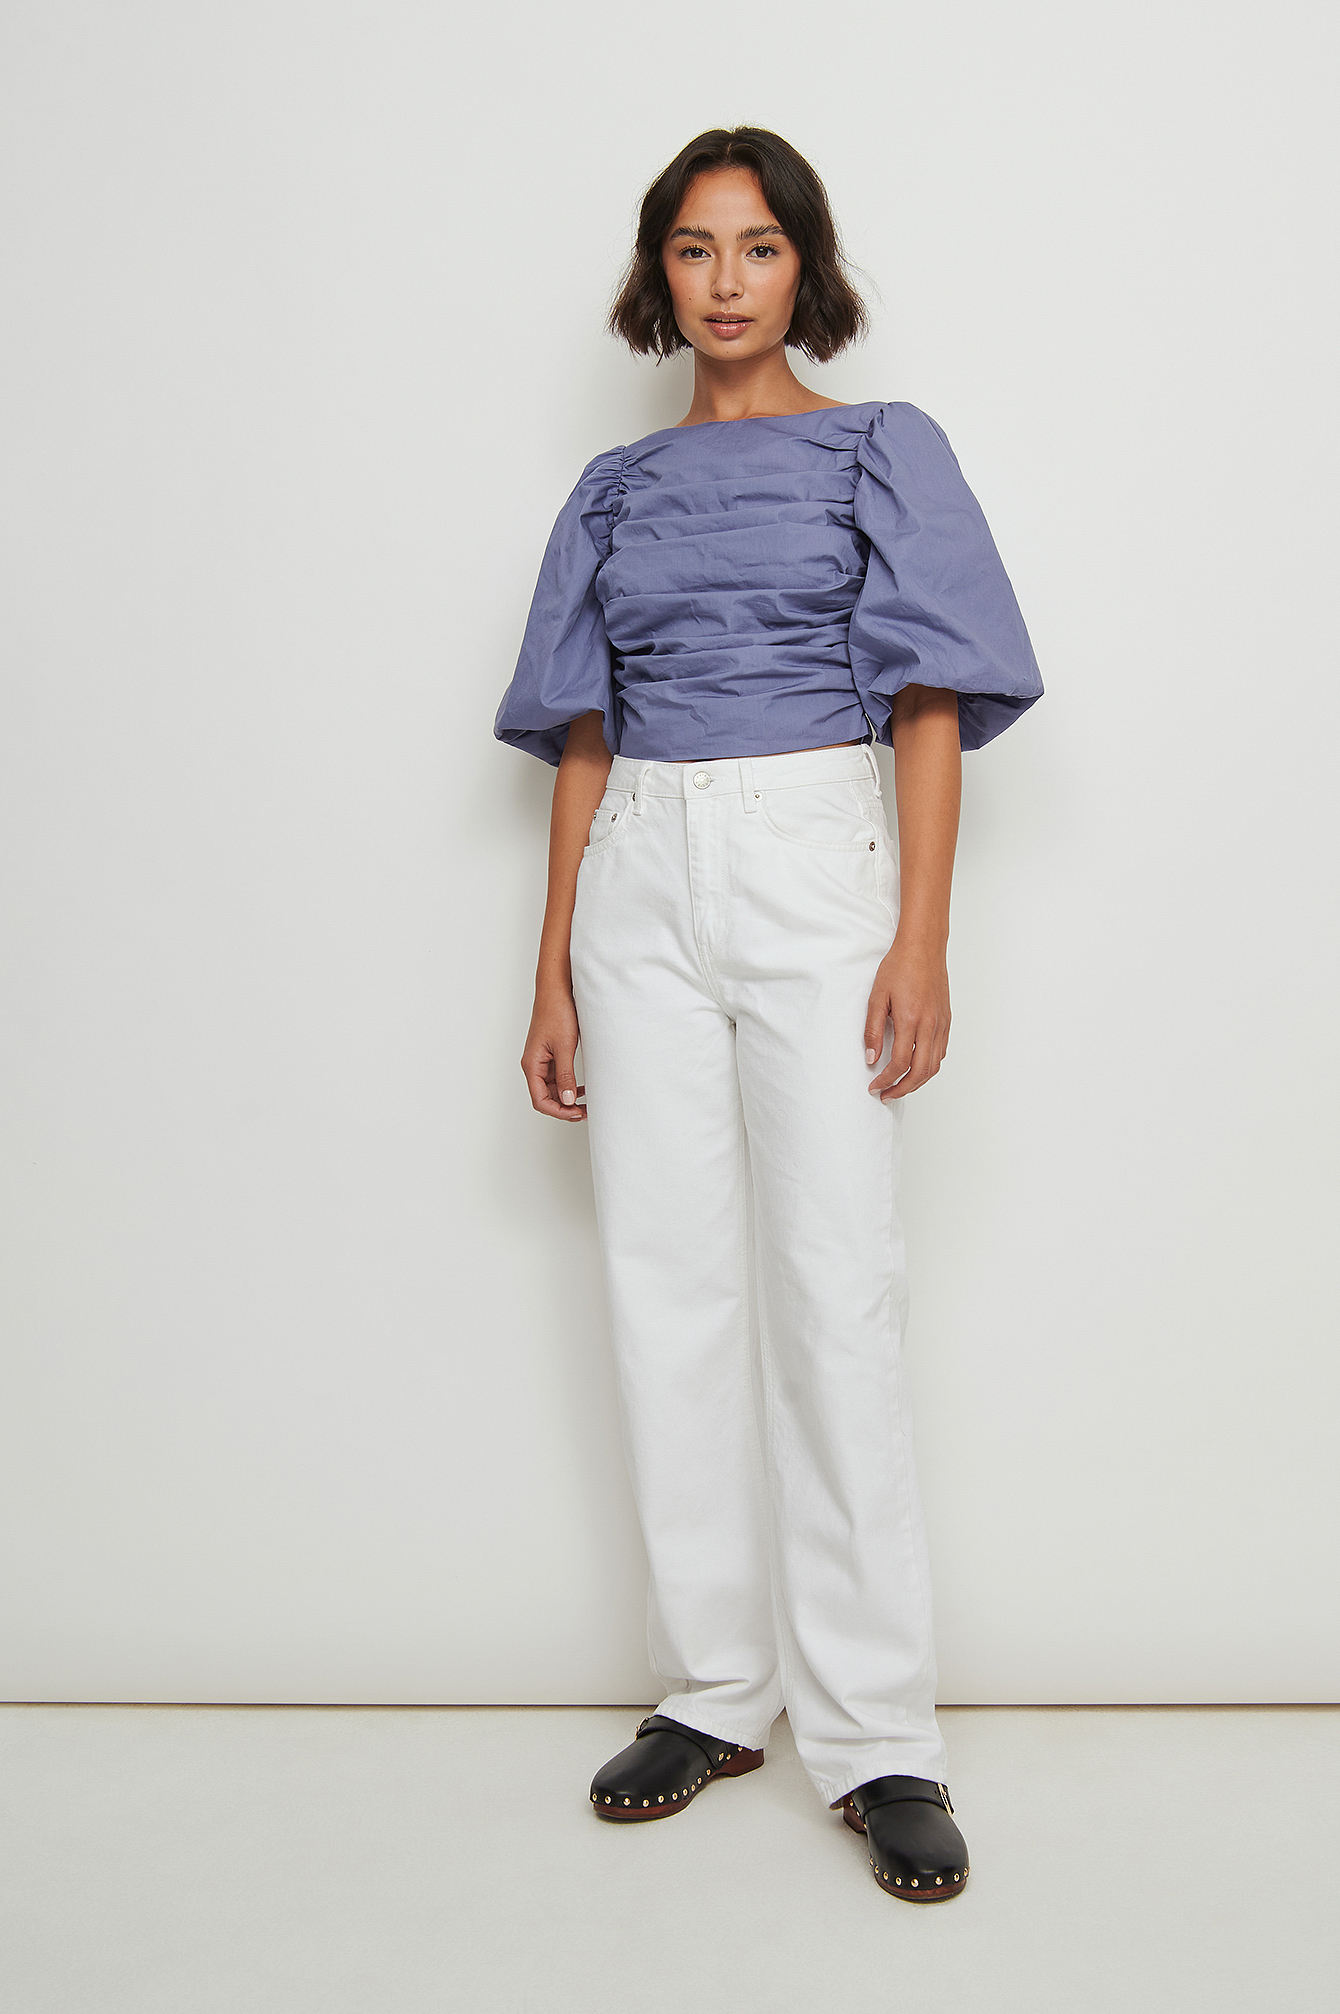 Gathered Front Cotton Top Outfit